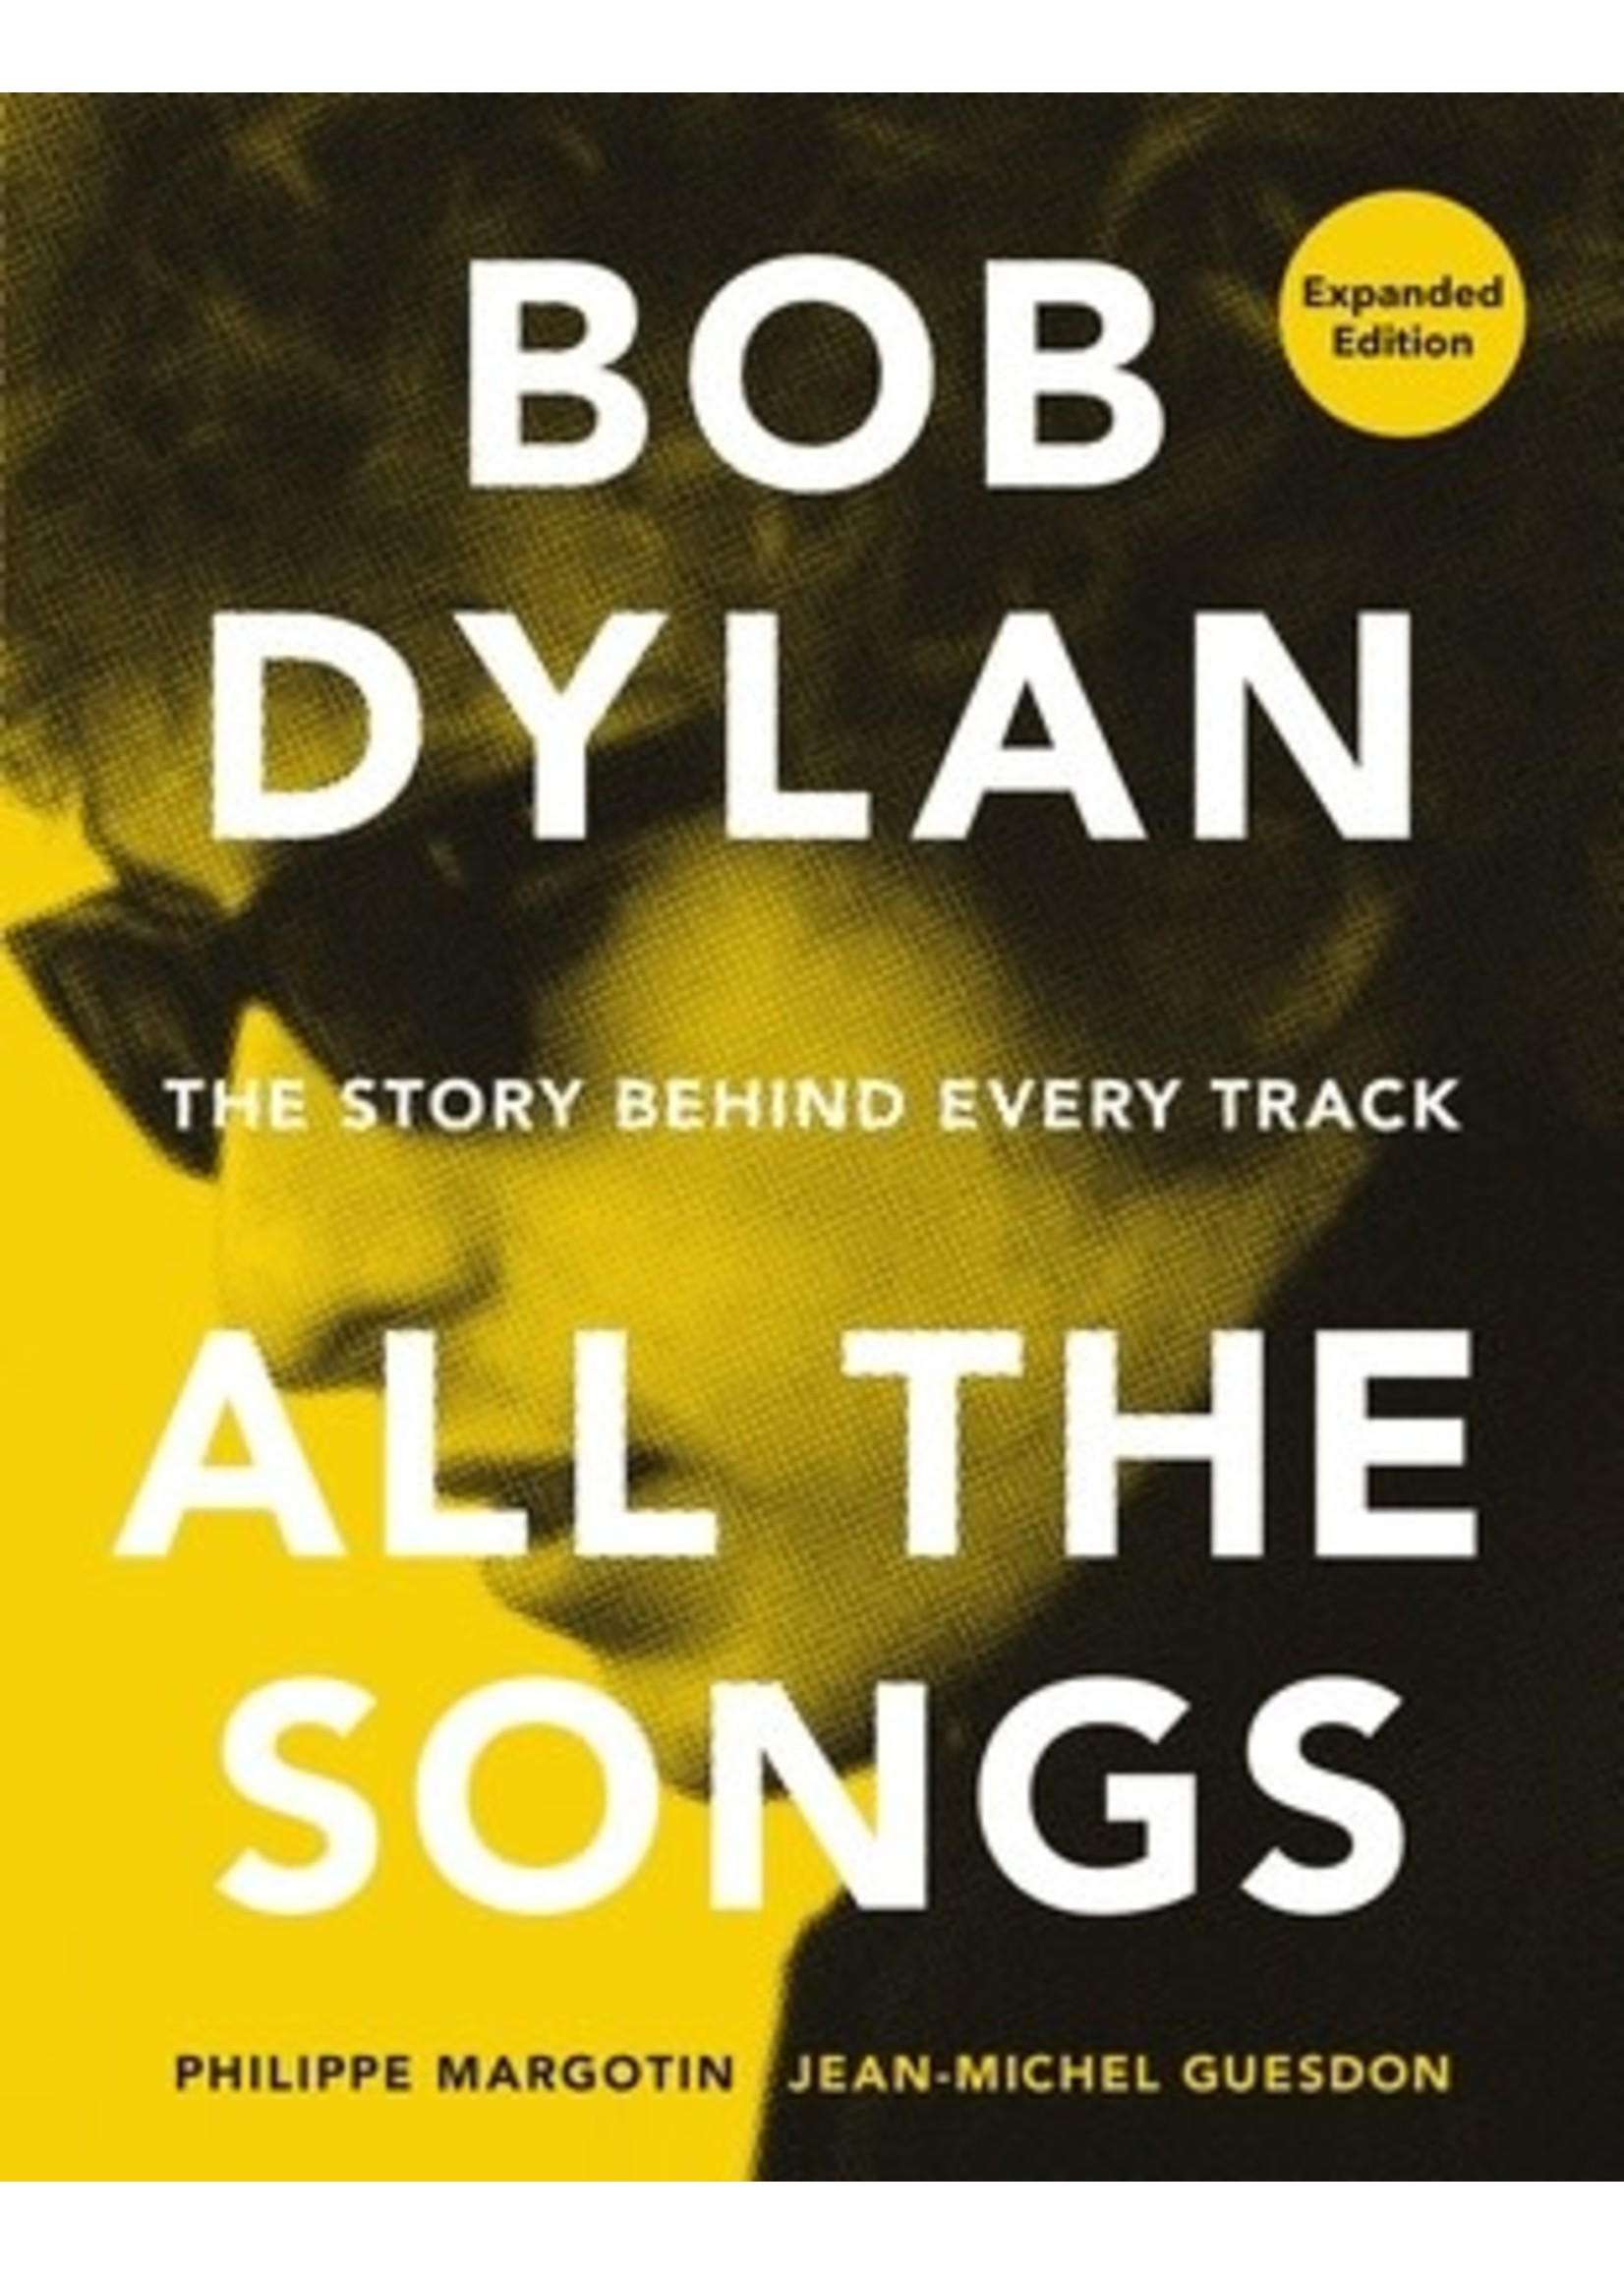 Bob Dylan All the Songs: The Story Behind Every Track Expanded Edition by Philippe Margotin, Jean-Michel Guesdon